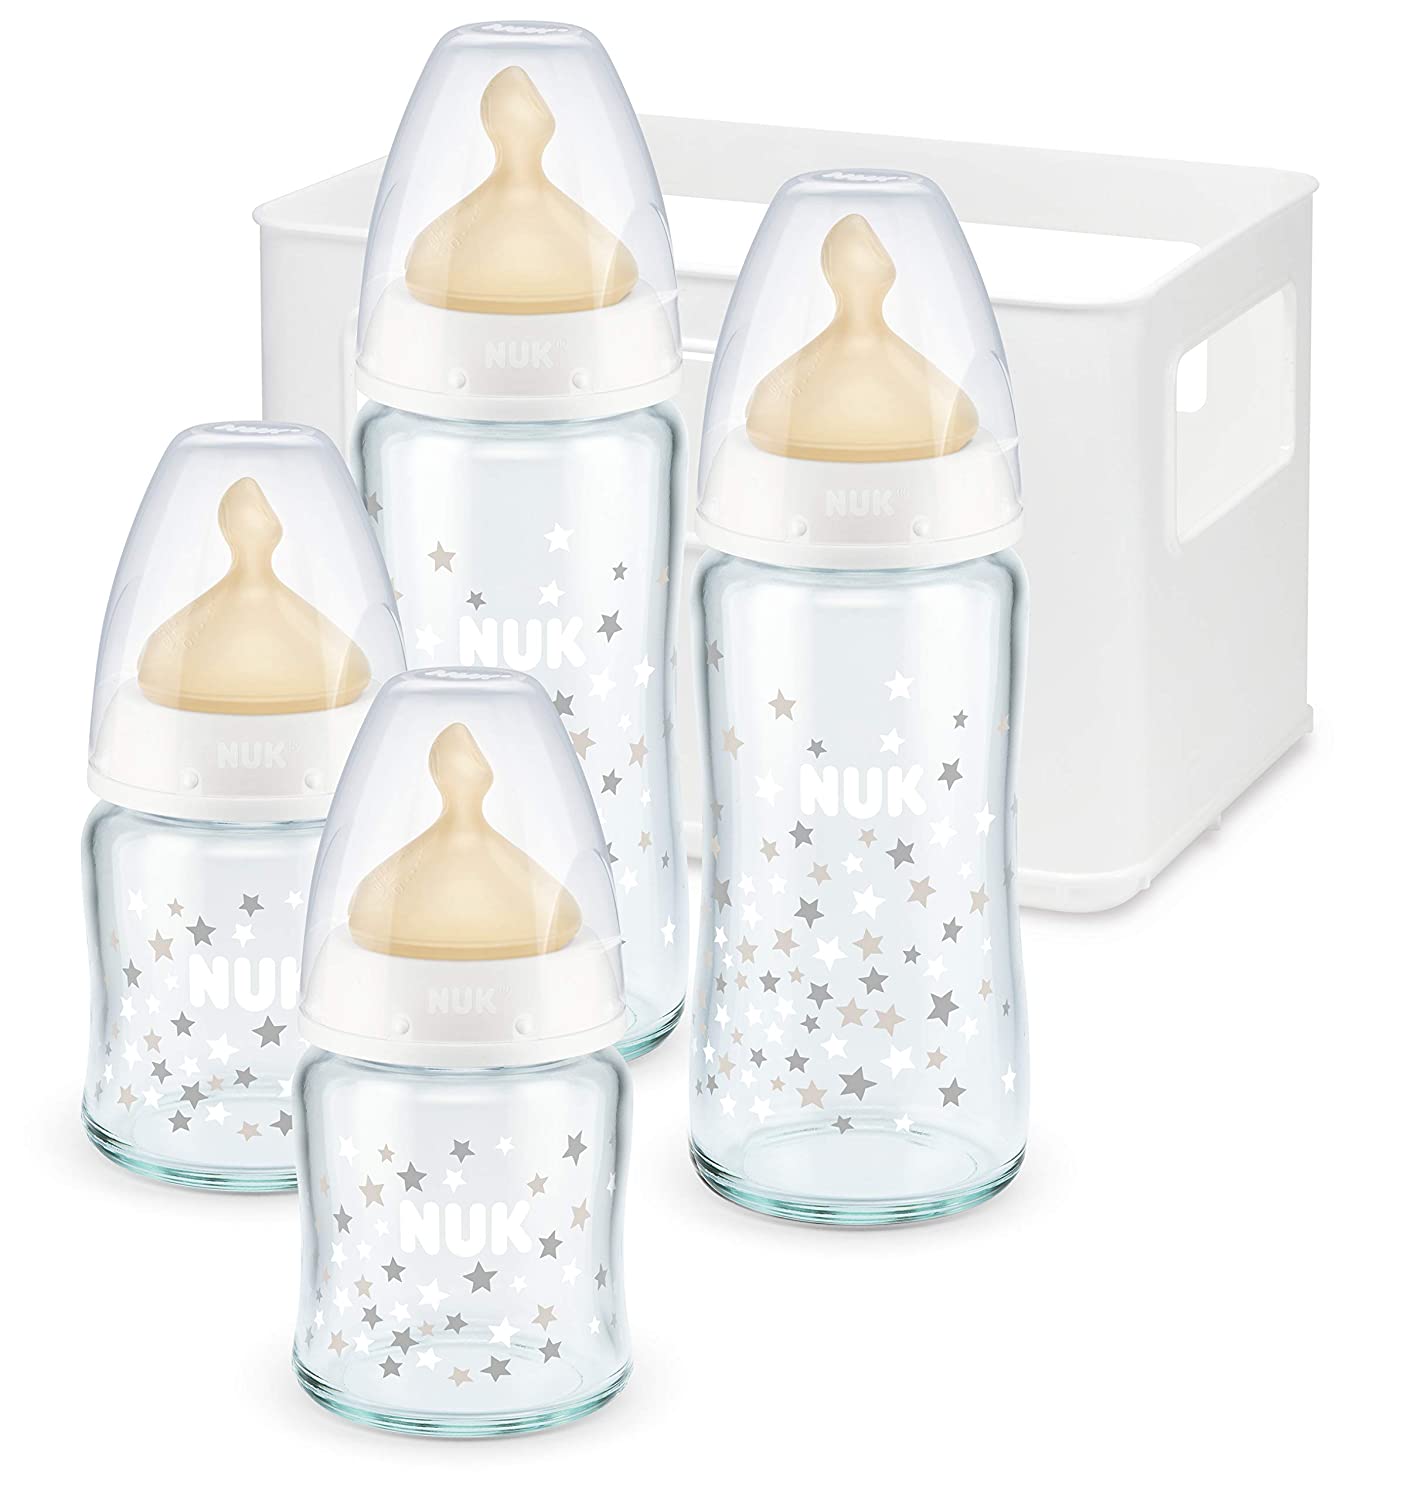 NUK First Choice Plus glass baby bottle starter set, with 4 baby bottles including silicone teatcups & bottle box, 2x 120ml & 2x 240ml, 0-6 months, assorted design